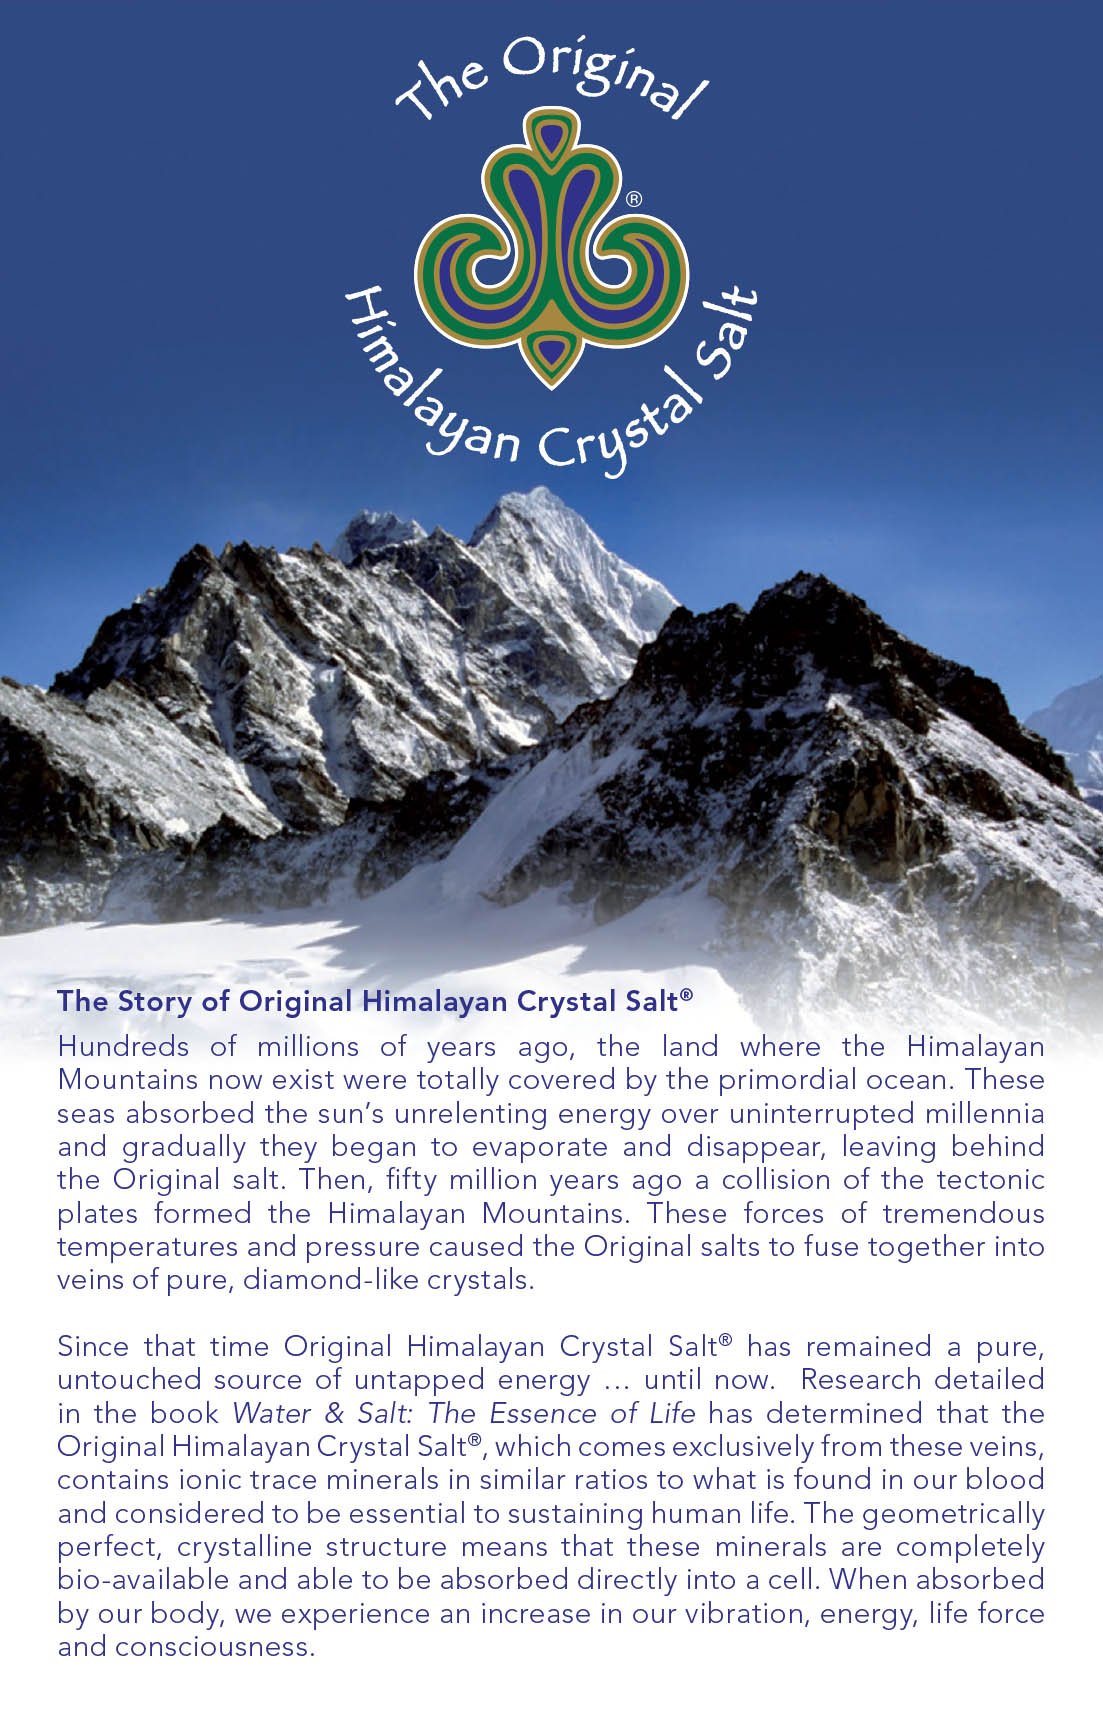 The story of Original Himalayan Crystal Salt: Hundreds of millions of years ago, the land where the HImalayan Mountains now exists were totally covered by the primordial ocean. These seas absorbed the sun’s unrelenting energy over uninterrupted millennia and gradually they began to evaporate and disappear, leaving behind the Original Salt.